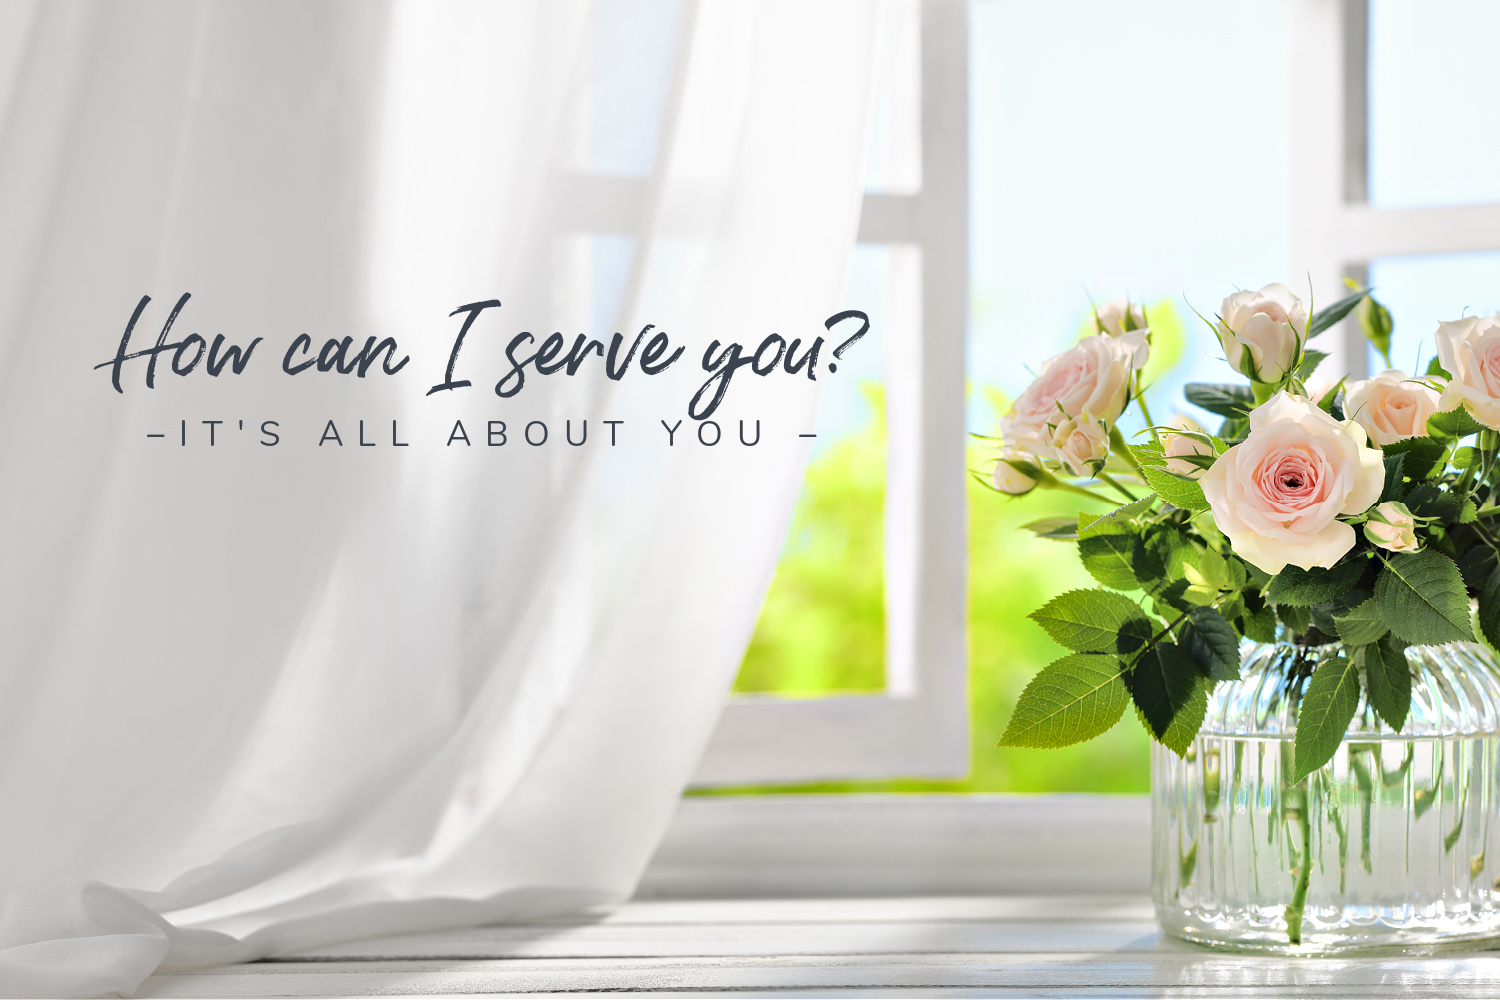 It's all about you! Answering your questions relating to women in their 50's and beyond. Recipes, crafts, faith, encouragement with reliable and relatable resources relating to worry, stress, relationships, purpose, fitness, purpose and life balance! 